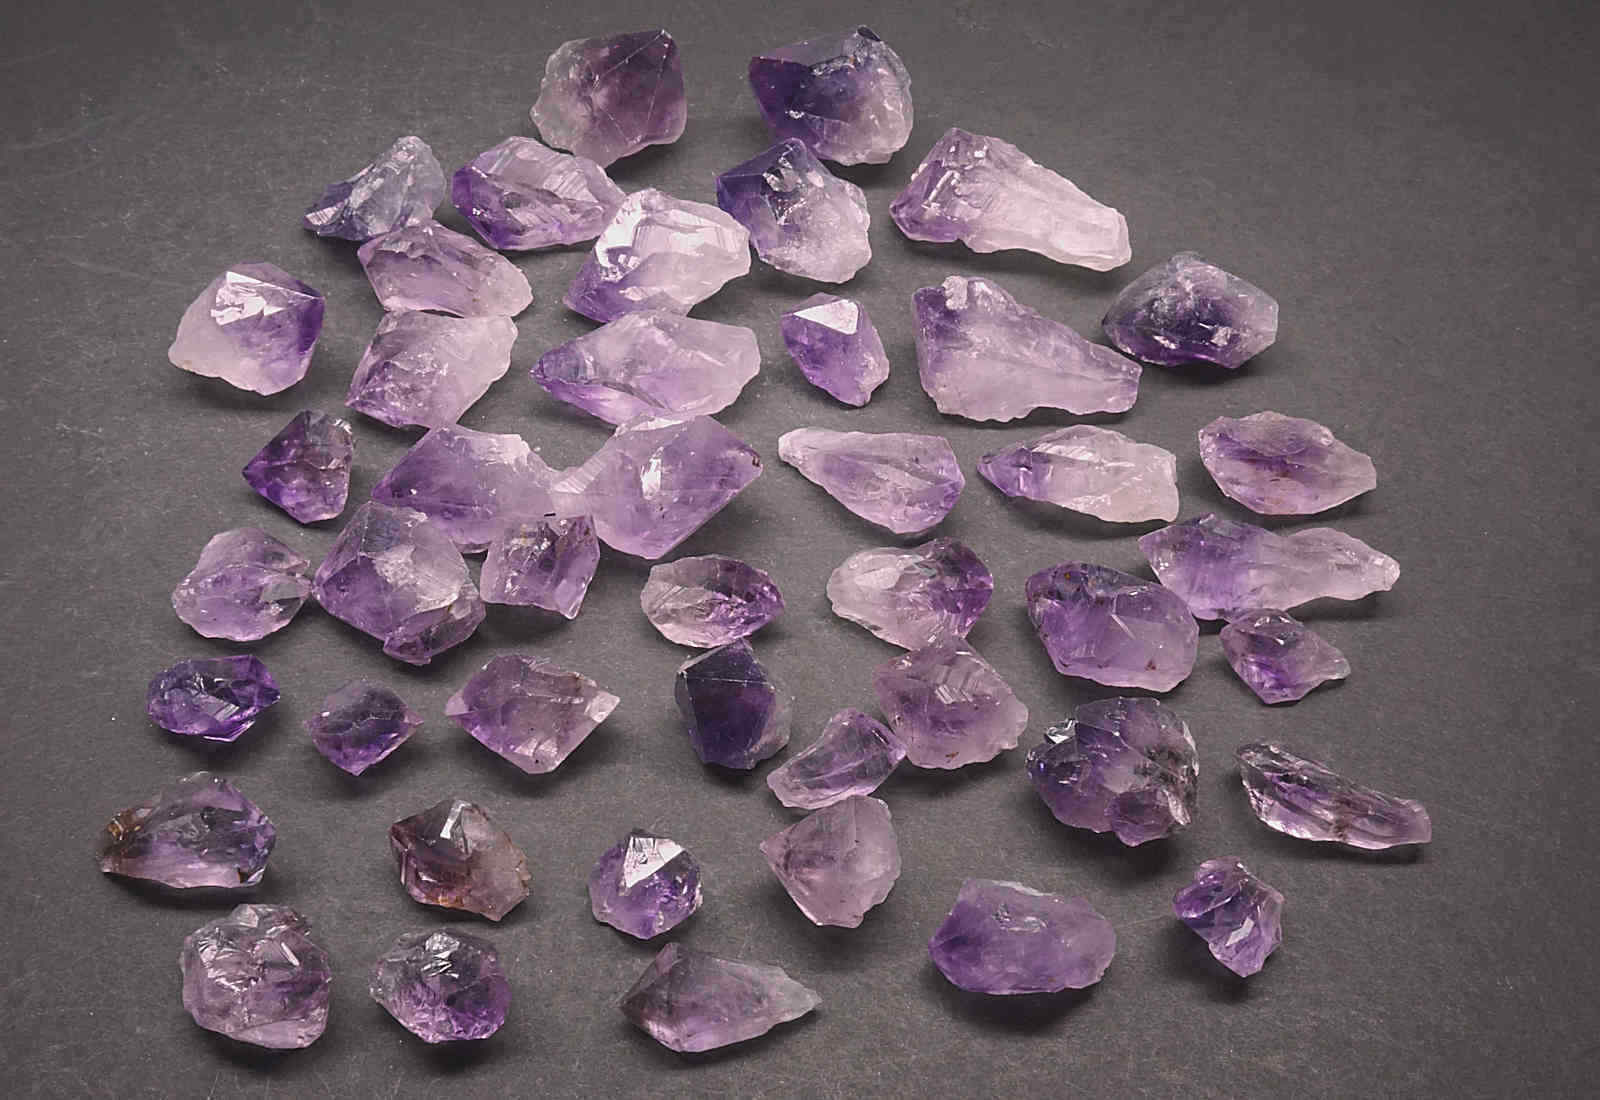 Amethyst Crystal Points Collection 1/2 Lb Natural Dark Purple Crystals Brazil